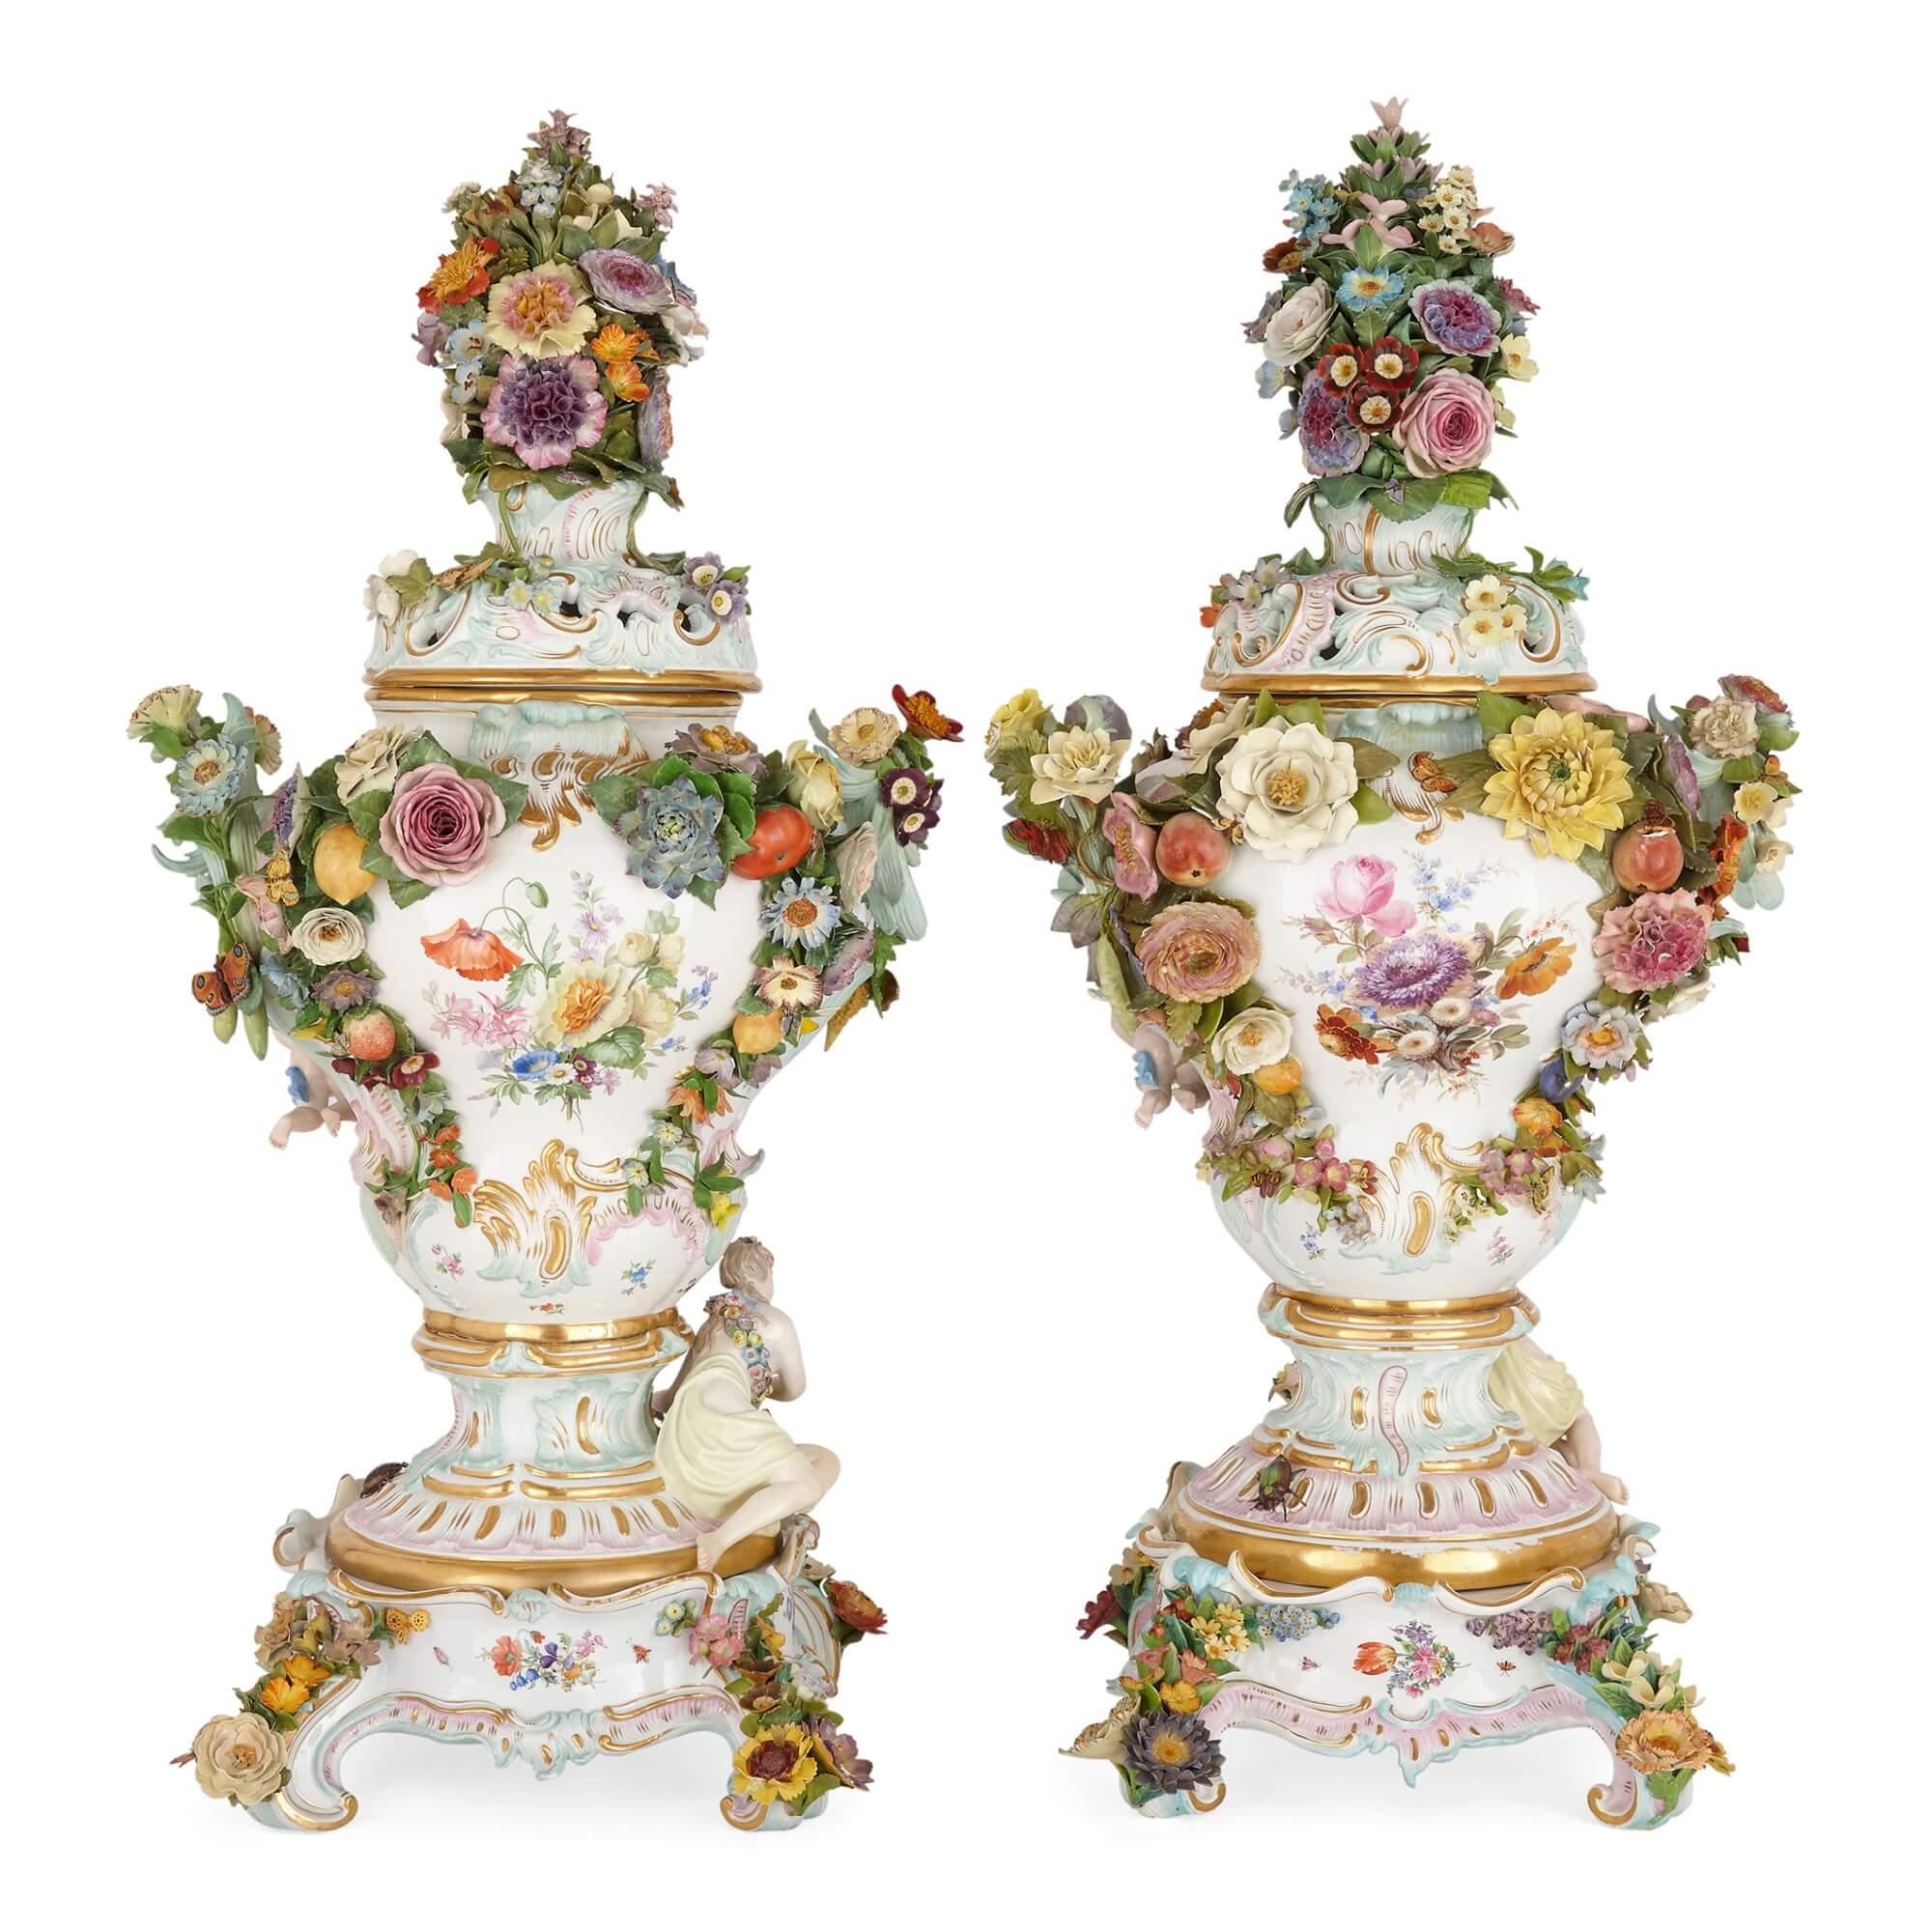 Pair of very large floral Rococo-style Meissen potpourri vases 
German, Late 19th Century 
Height 89cm, width 44cm, depth 33cm

These charming vases were manufactured by Meissen, Europe’s oldest porcelain manufactory. Each feature impressive